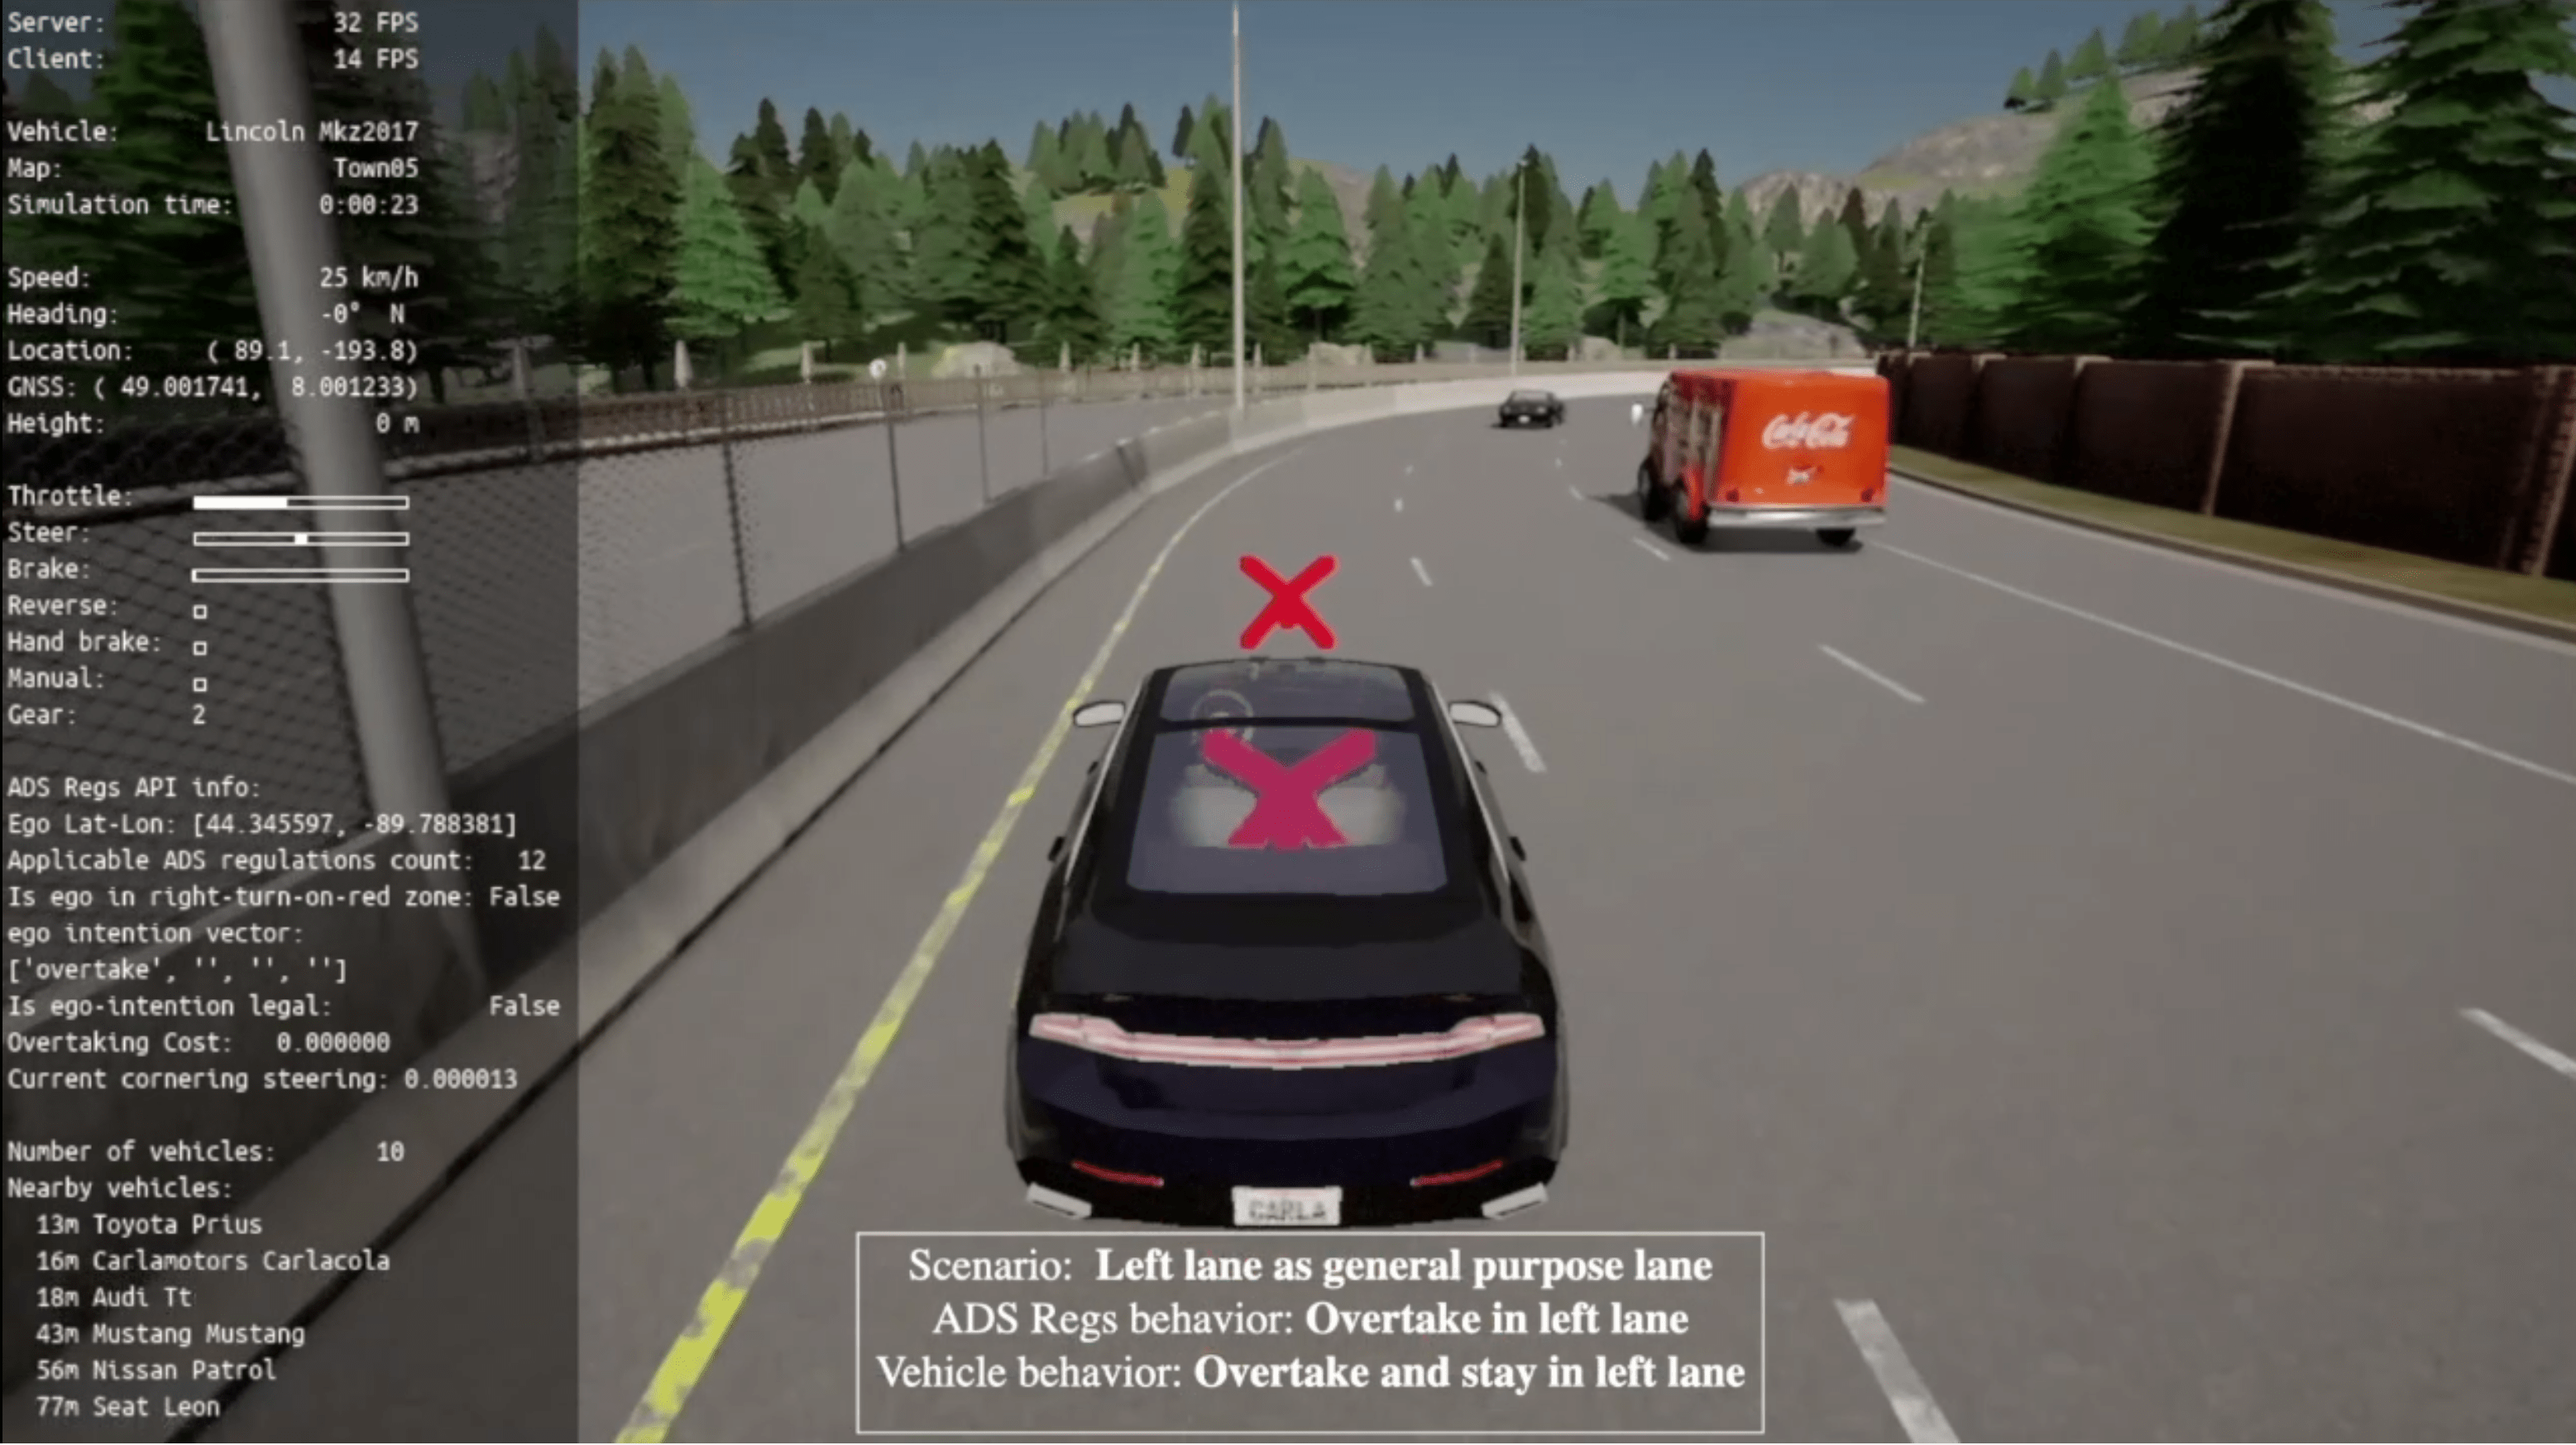 Simulated vehicle traveling in the left lane on a three-lane roadway. A single X is overlaid on the left lane in front of the vehicle. A panel at left illustrates information about the simulation.